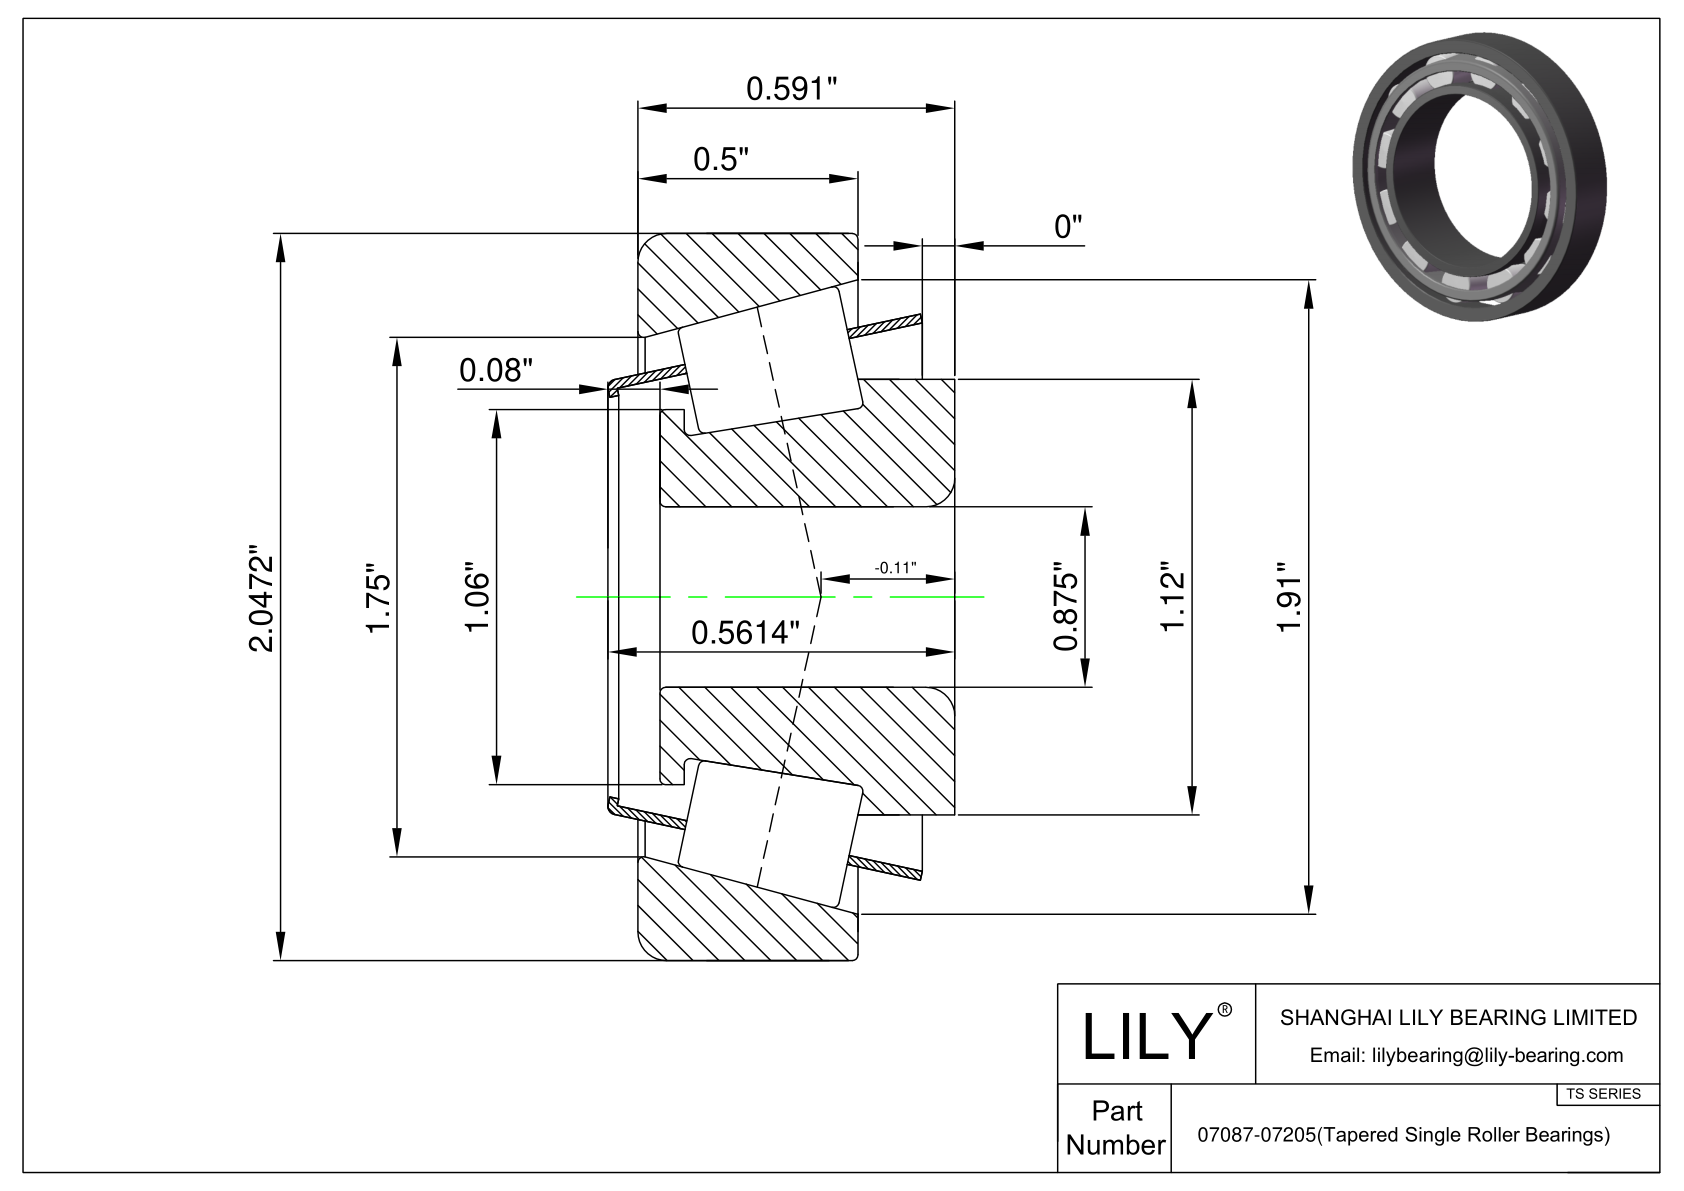 07087-07205 TS (Tapered Single Roller Bearings) (Imperial) cad drawing